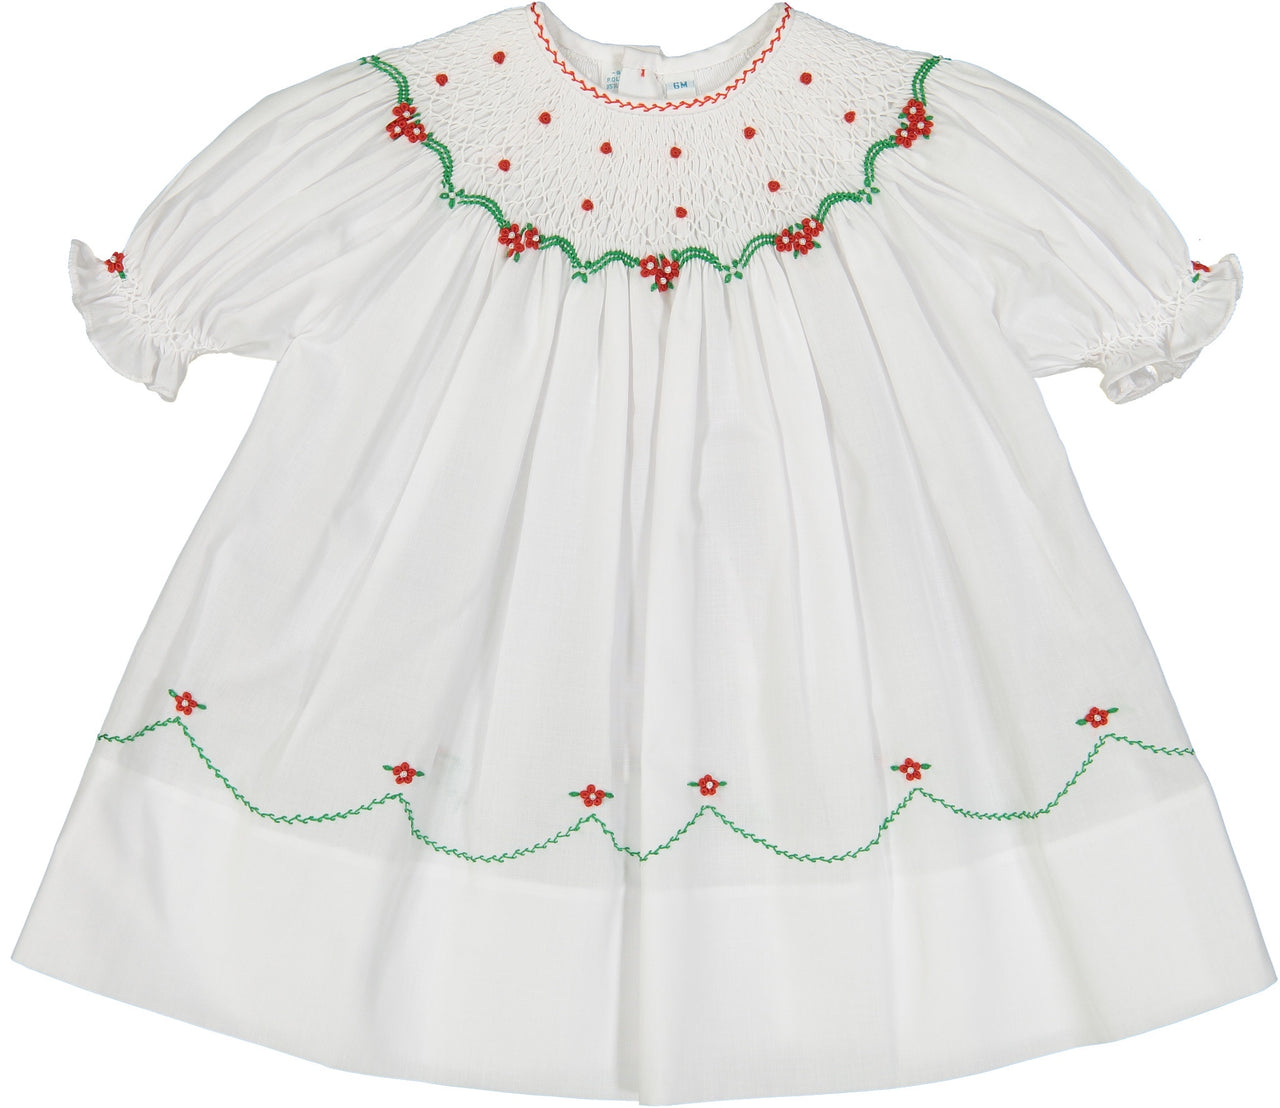 Feltman Brothers Holiday Pearl Flower SS Bishop Dress White/Red/Green 17459SS 5010